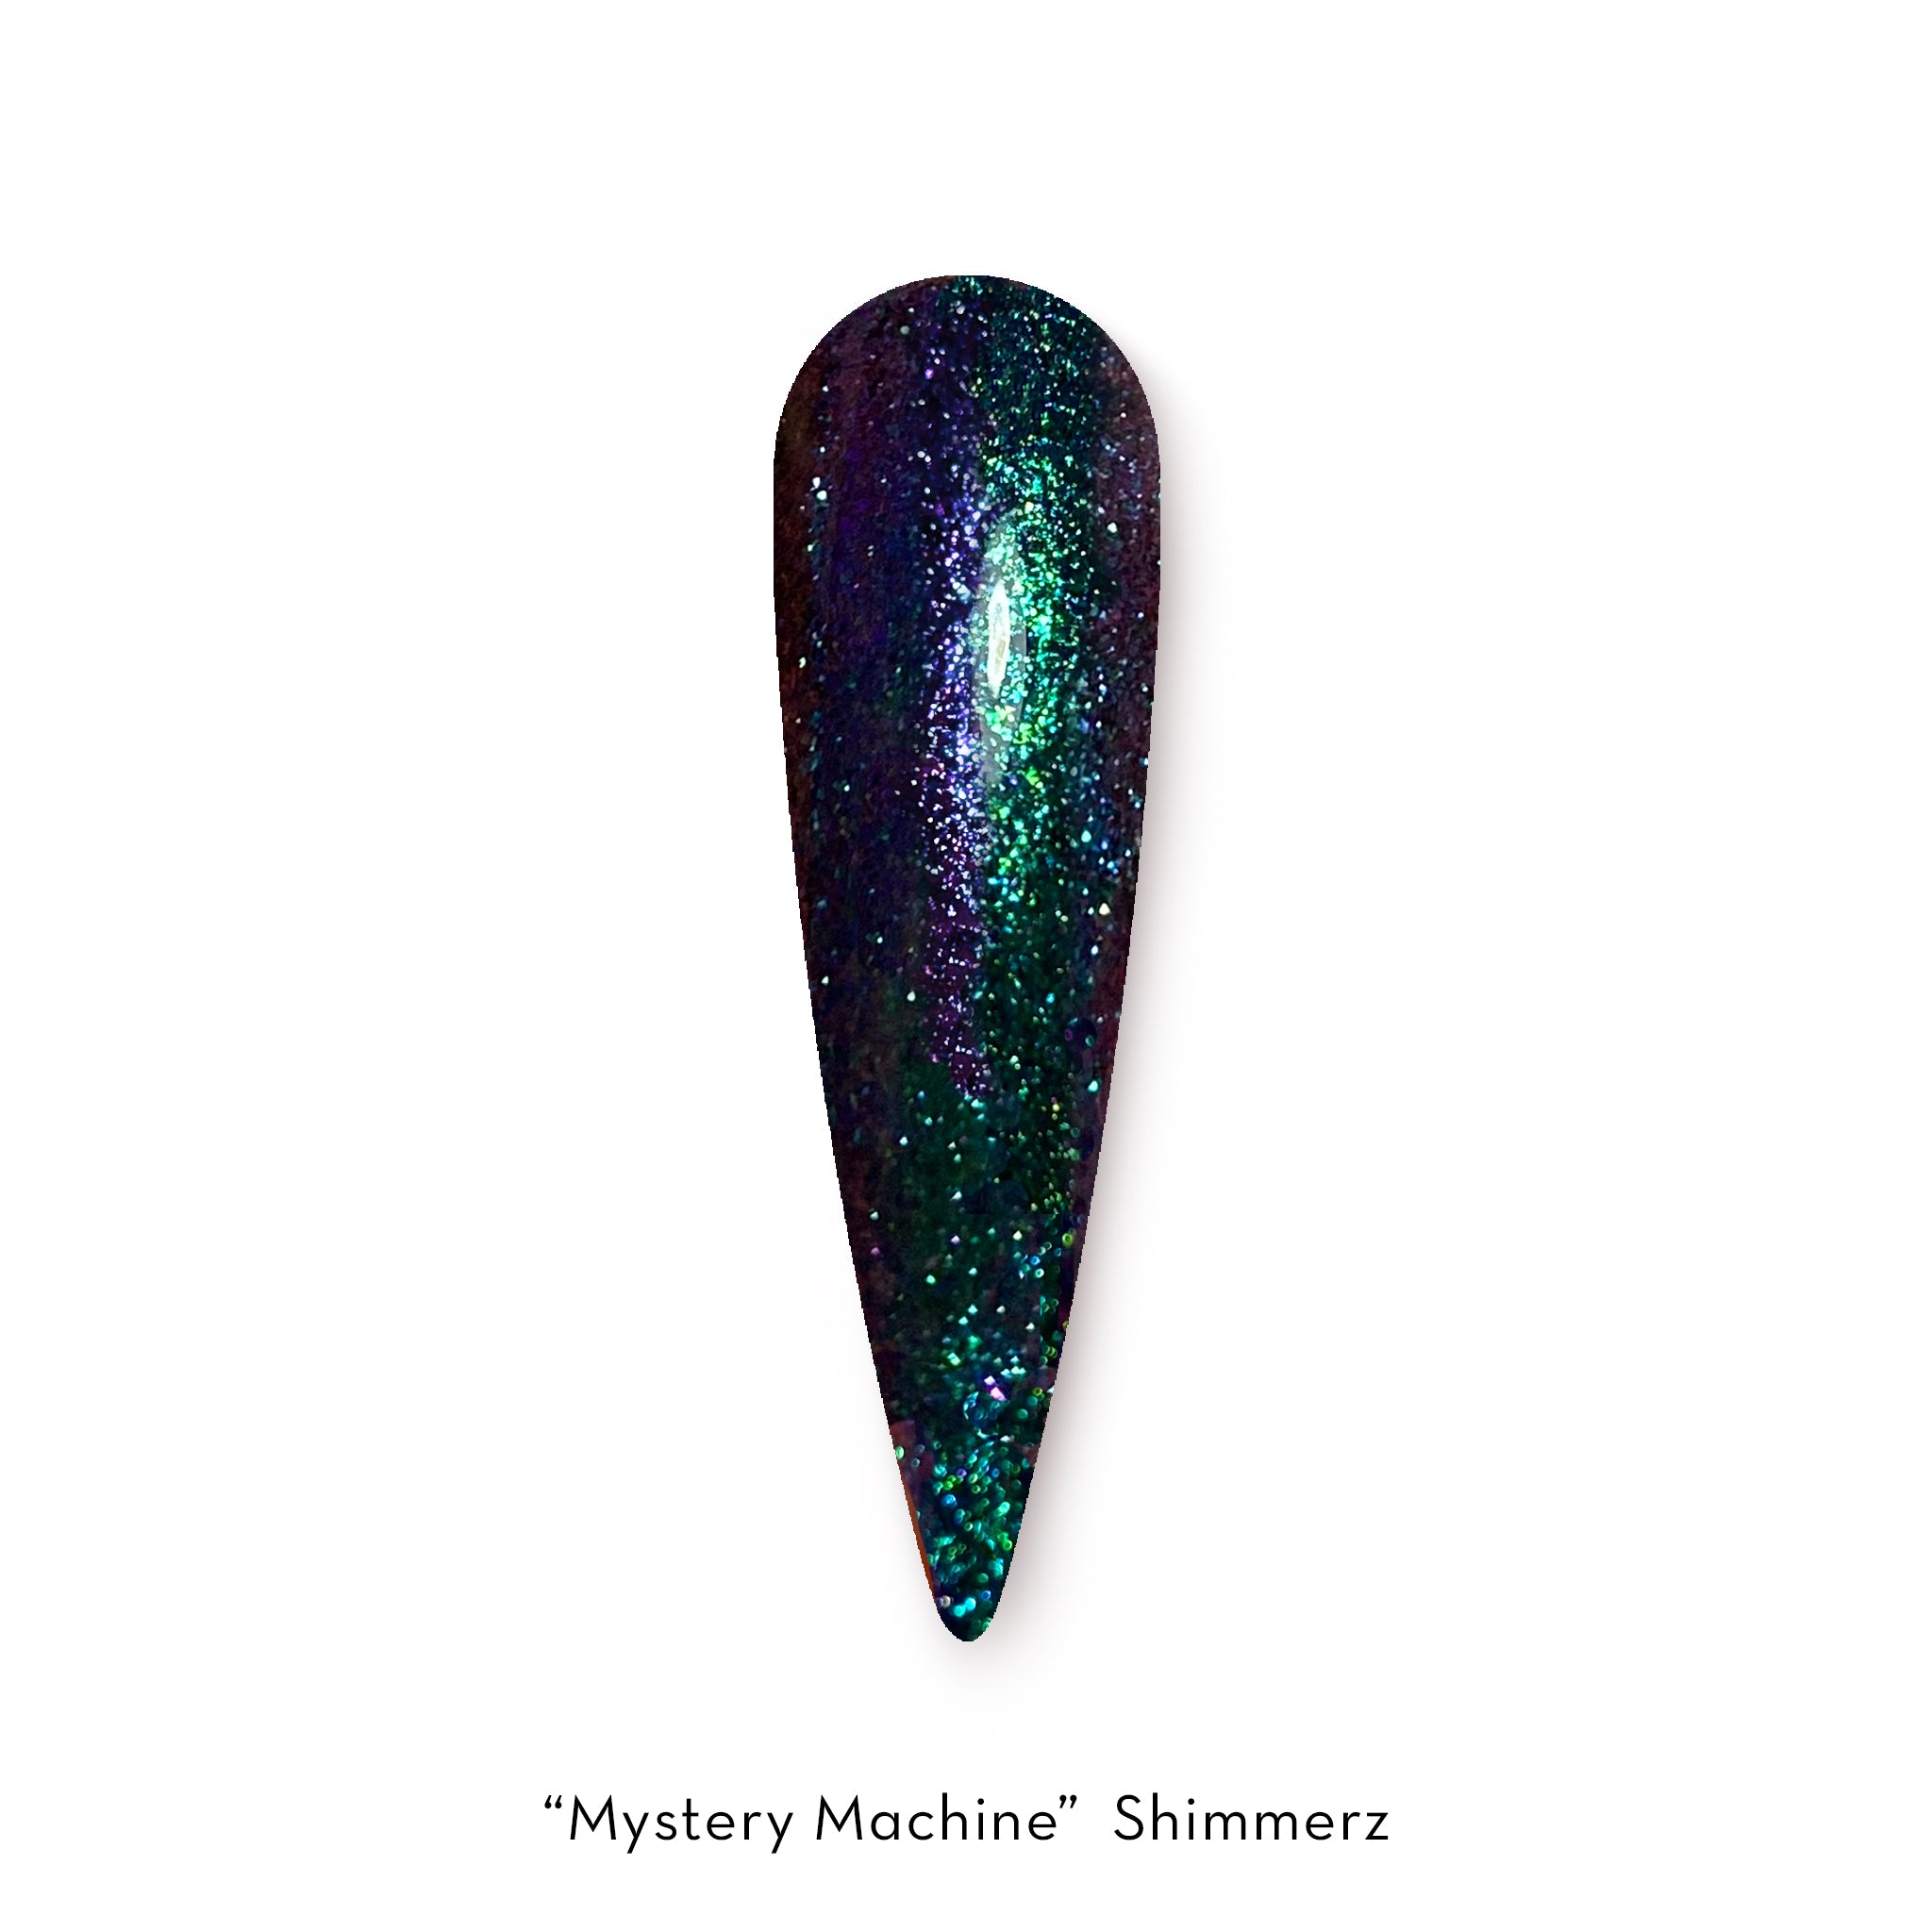 Fuzion UV/LED Halloween 2023 Mystery Machine Collection - Creata Beauty - Professional Beauty Products